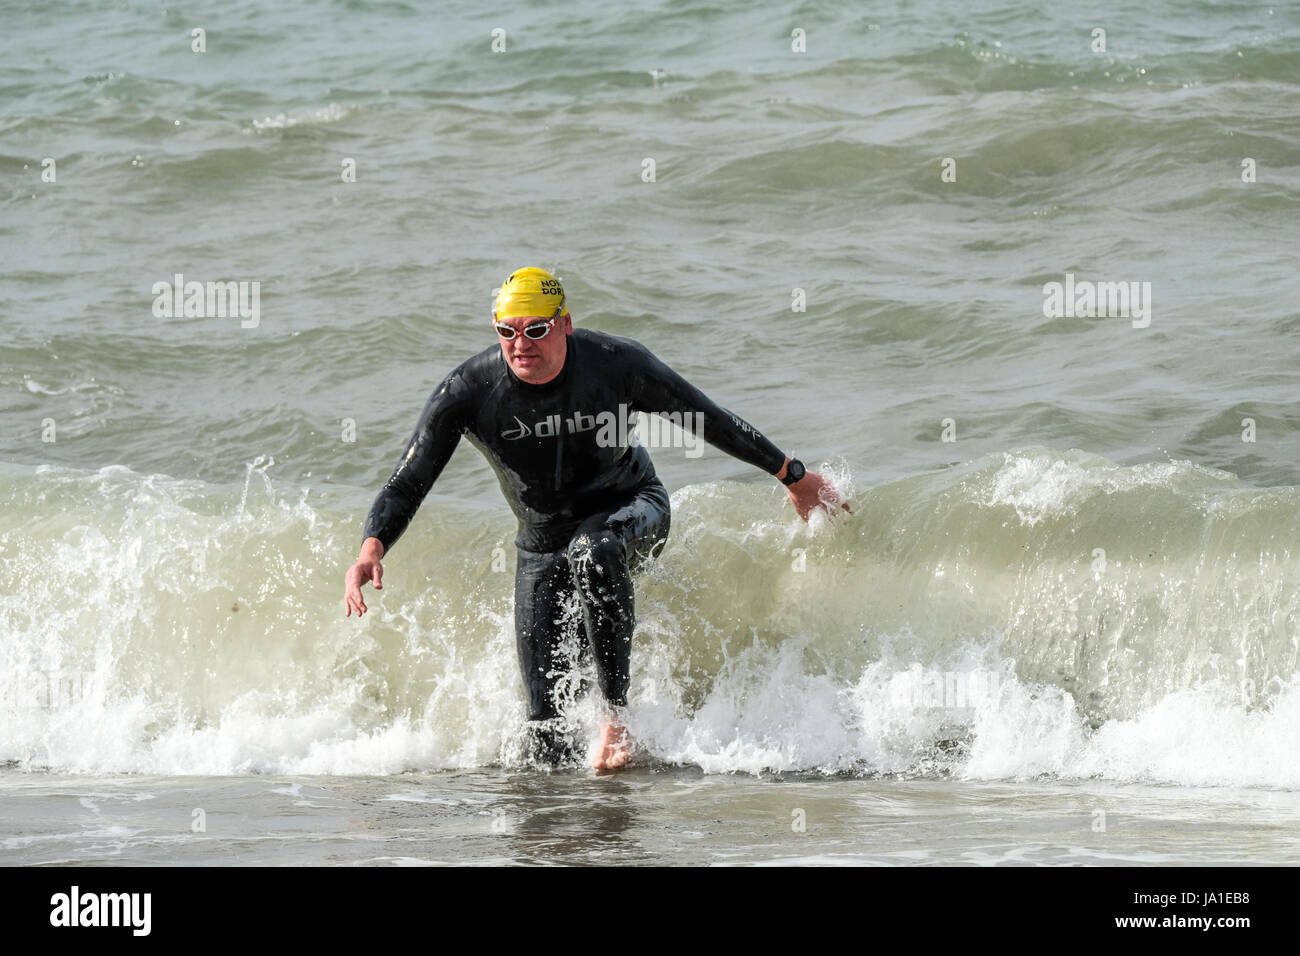 West Bay, Dorset, UK. 4th June, 2017. Competitors come out of the sea out of West Bay on the first stage of the a West Bay Triathlon. After a sea swim along Dorset's Jurassic coast competitors take part in a bike sprint through the West Dorset countryside before completing the event with a run along the coastal path. Credit: Tom Corban/Alamy Live News Stock Photo